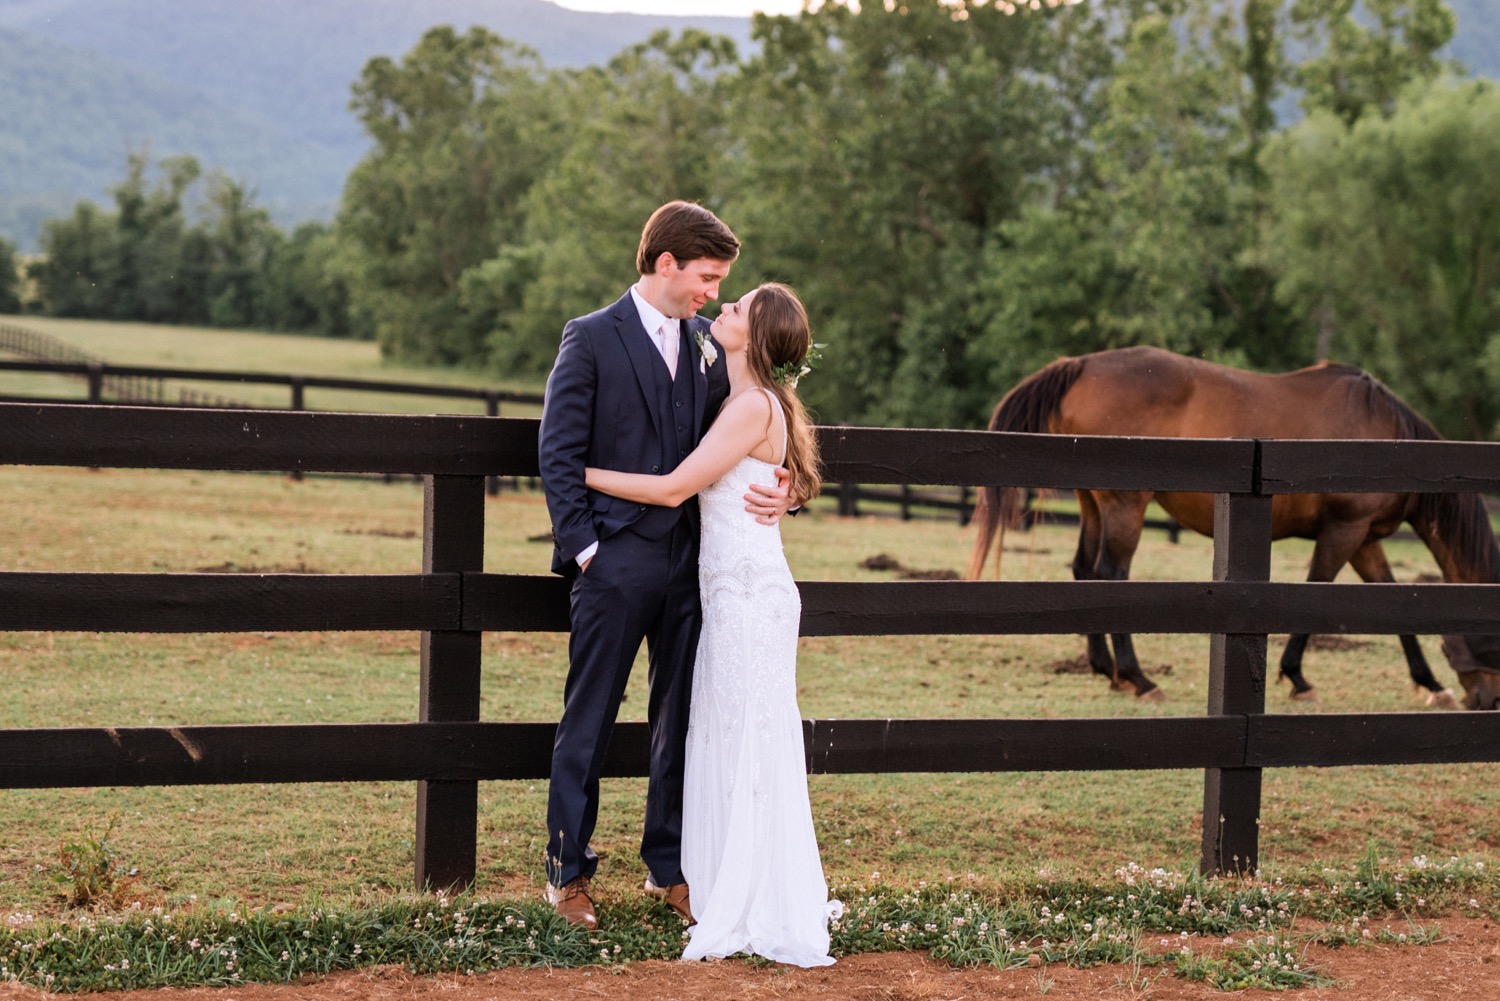 Wedding portraits with bride and groom after their wedding ceremony in Charlottesville, VA